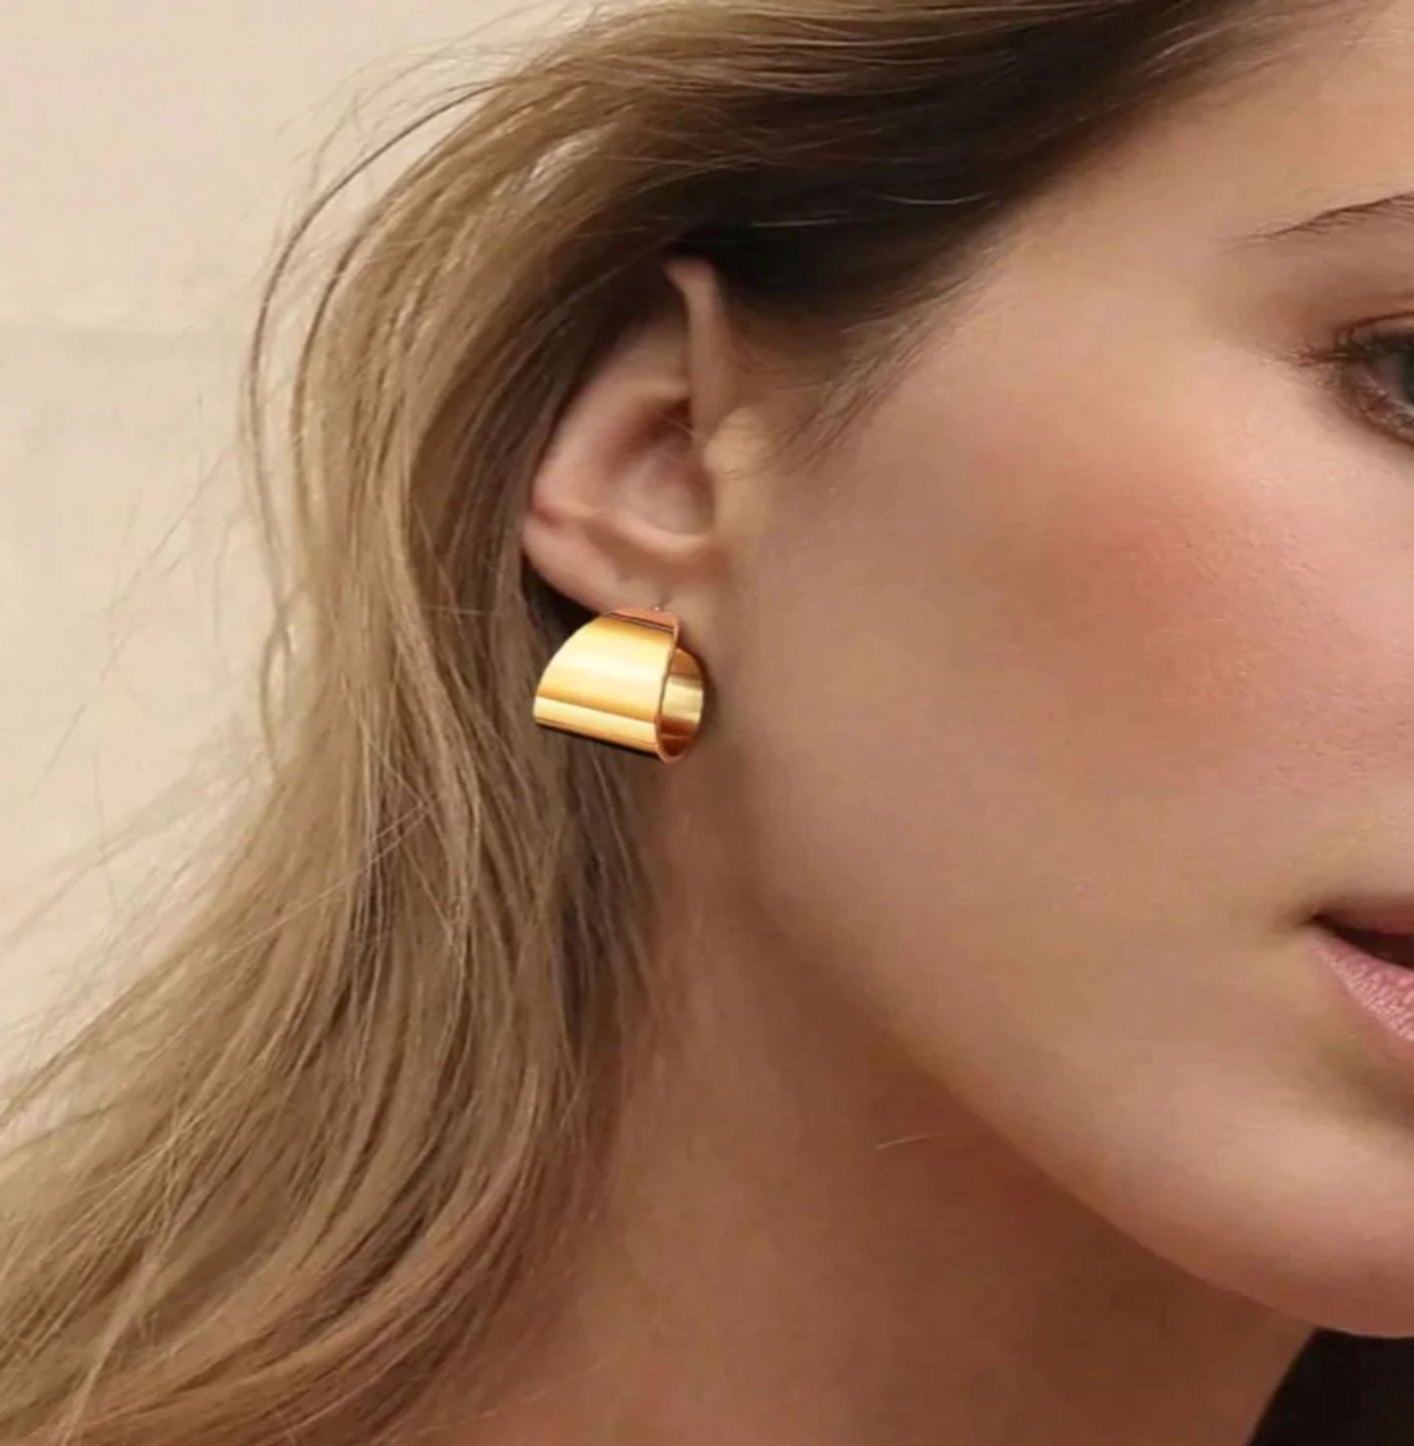 GLOSSY EARRINGS earing Yubama Jewelry Online Store - The Elegant Designs of Gold and Silver ! 